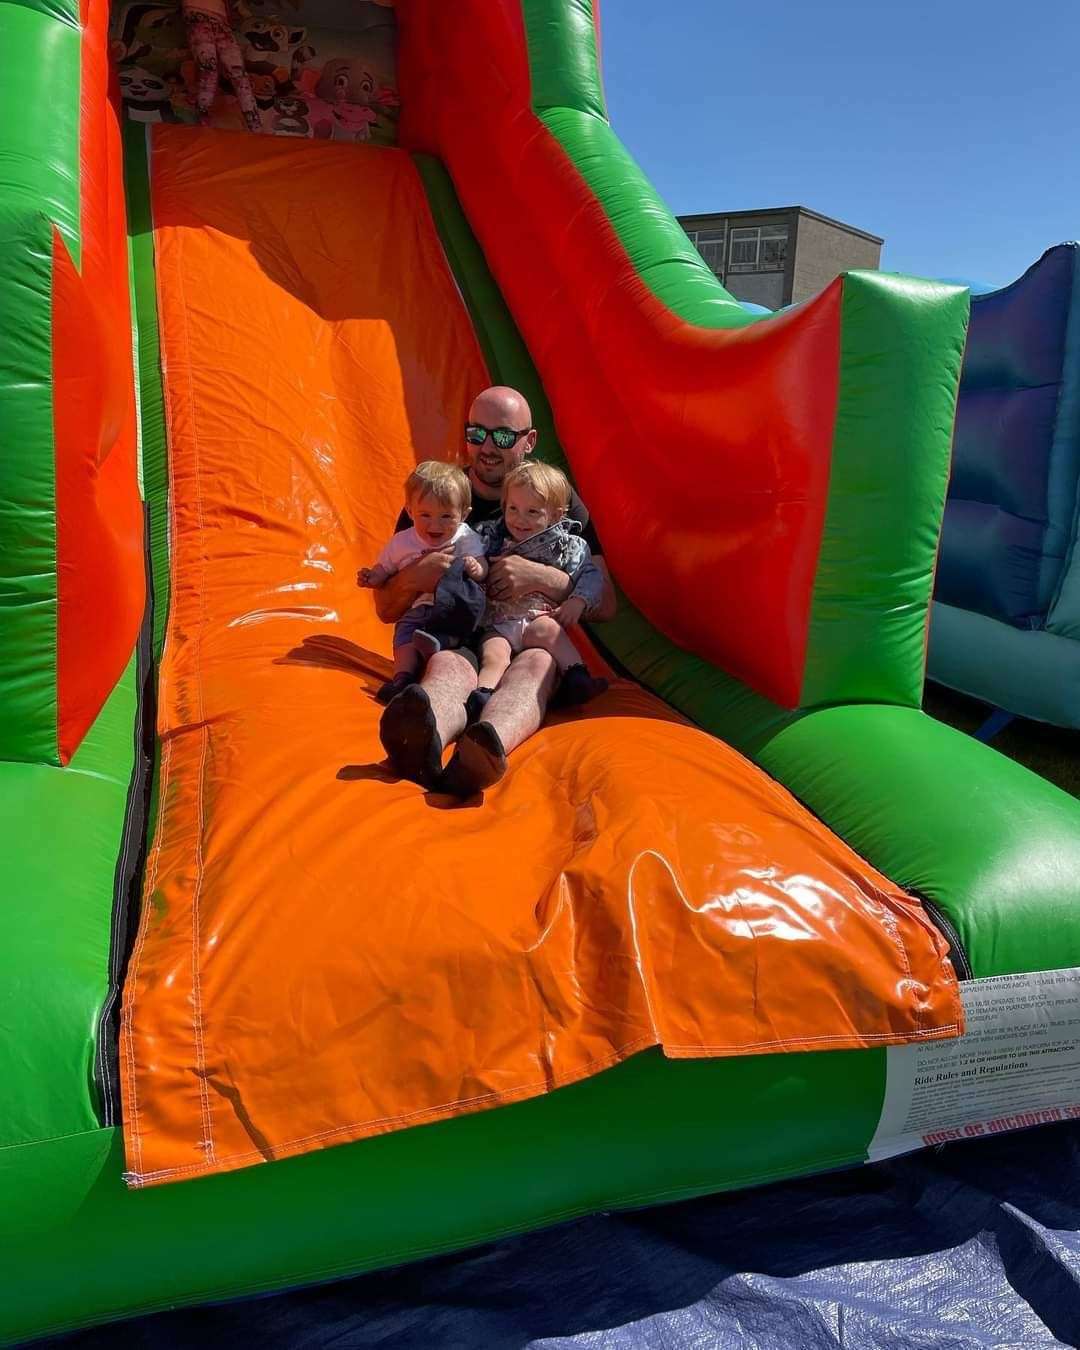 The inflatable slide was a huge attraction.